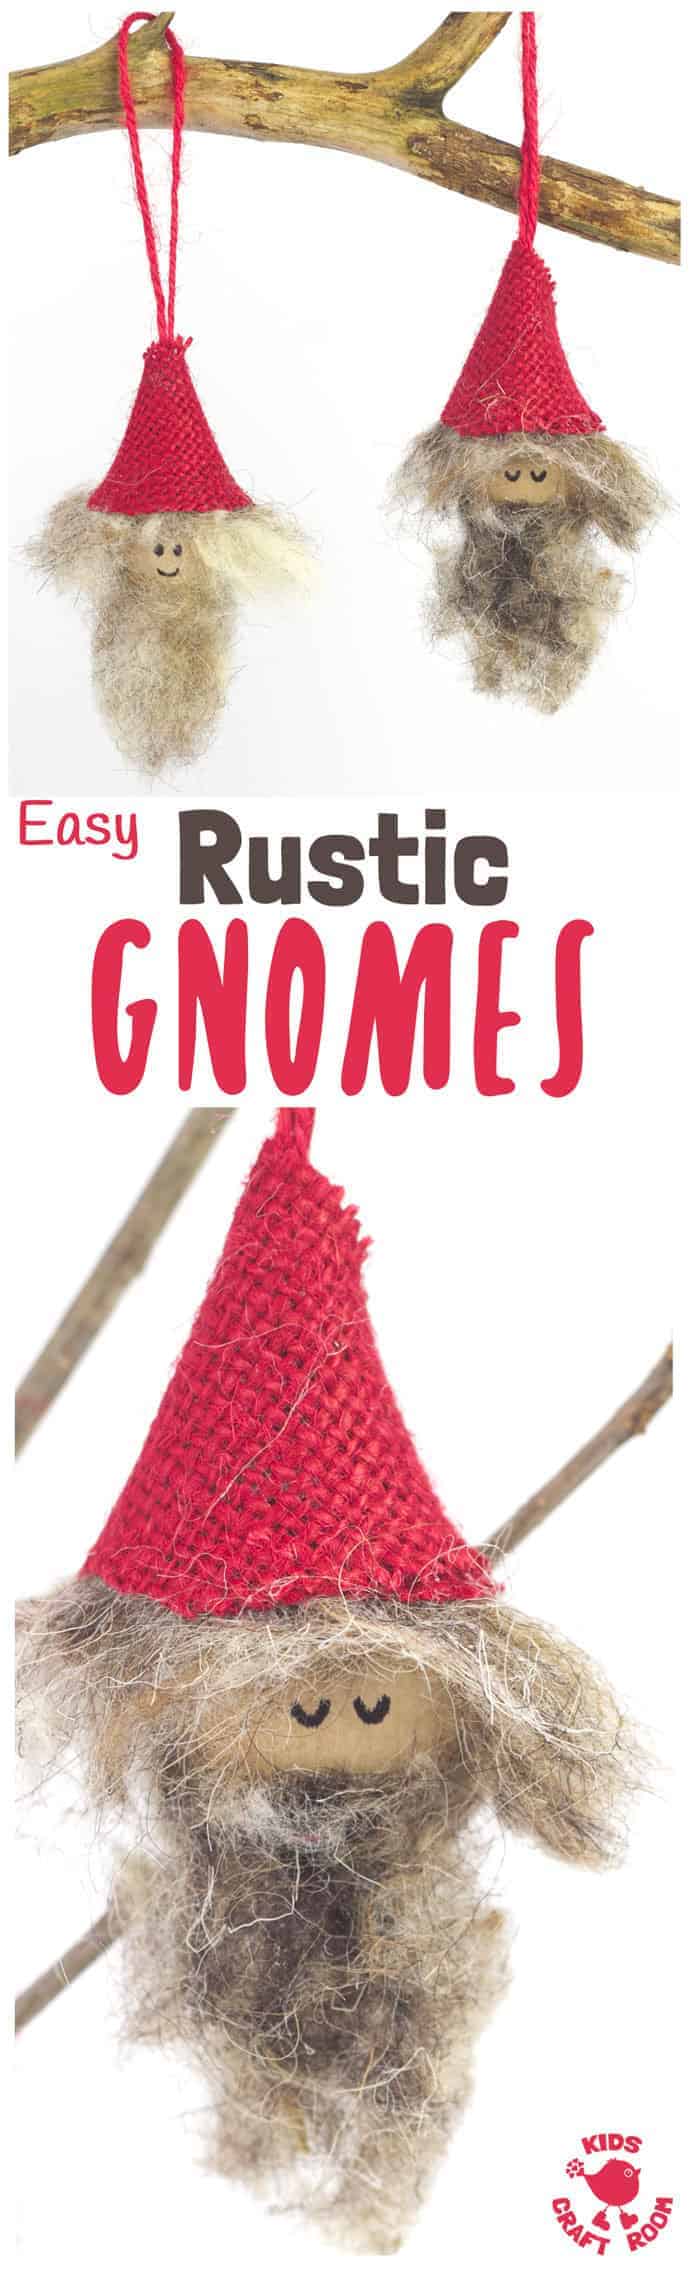 RUSTIC CHRISTMAS GNOMES are a fun Christmas craft for kids. Homemade gnome or elf ornaments bring colour and cheer to your Christmas tree. Every home needs a cheeky gnome or elf family! #christmas #ornaments #christmascrafts #kidscrafts #gnomes #elf #elves #elfcraft #rustic #burlap #burlapcrafts #kidscraftroom